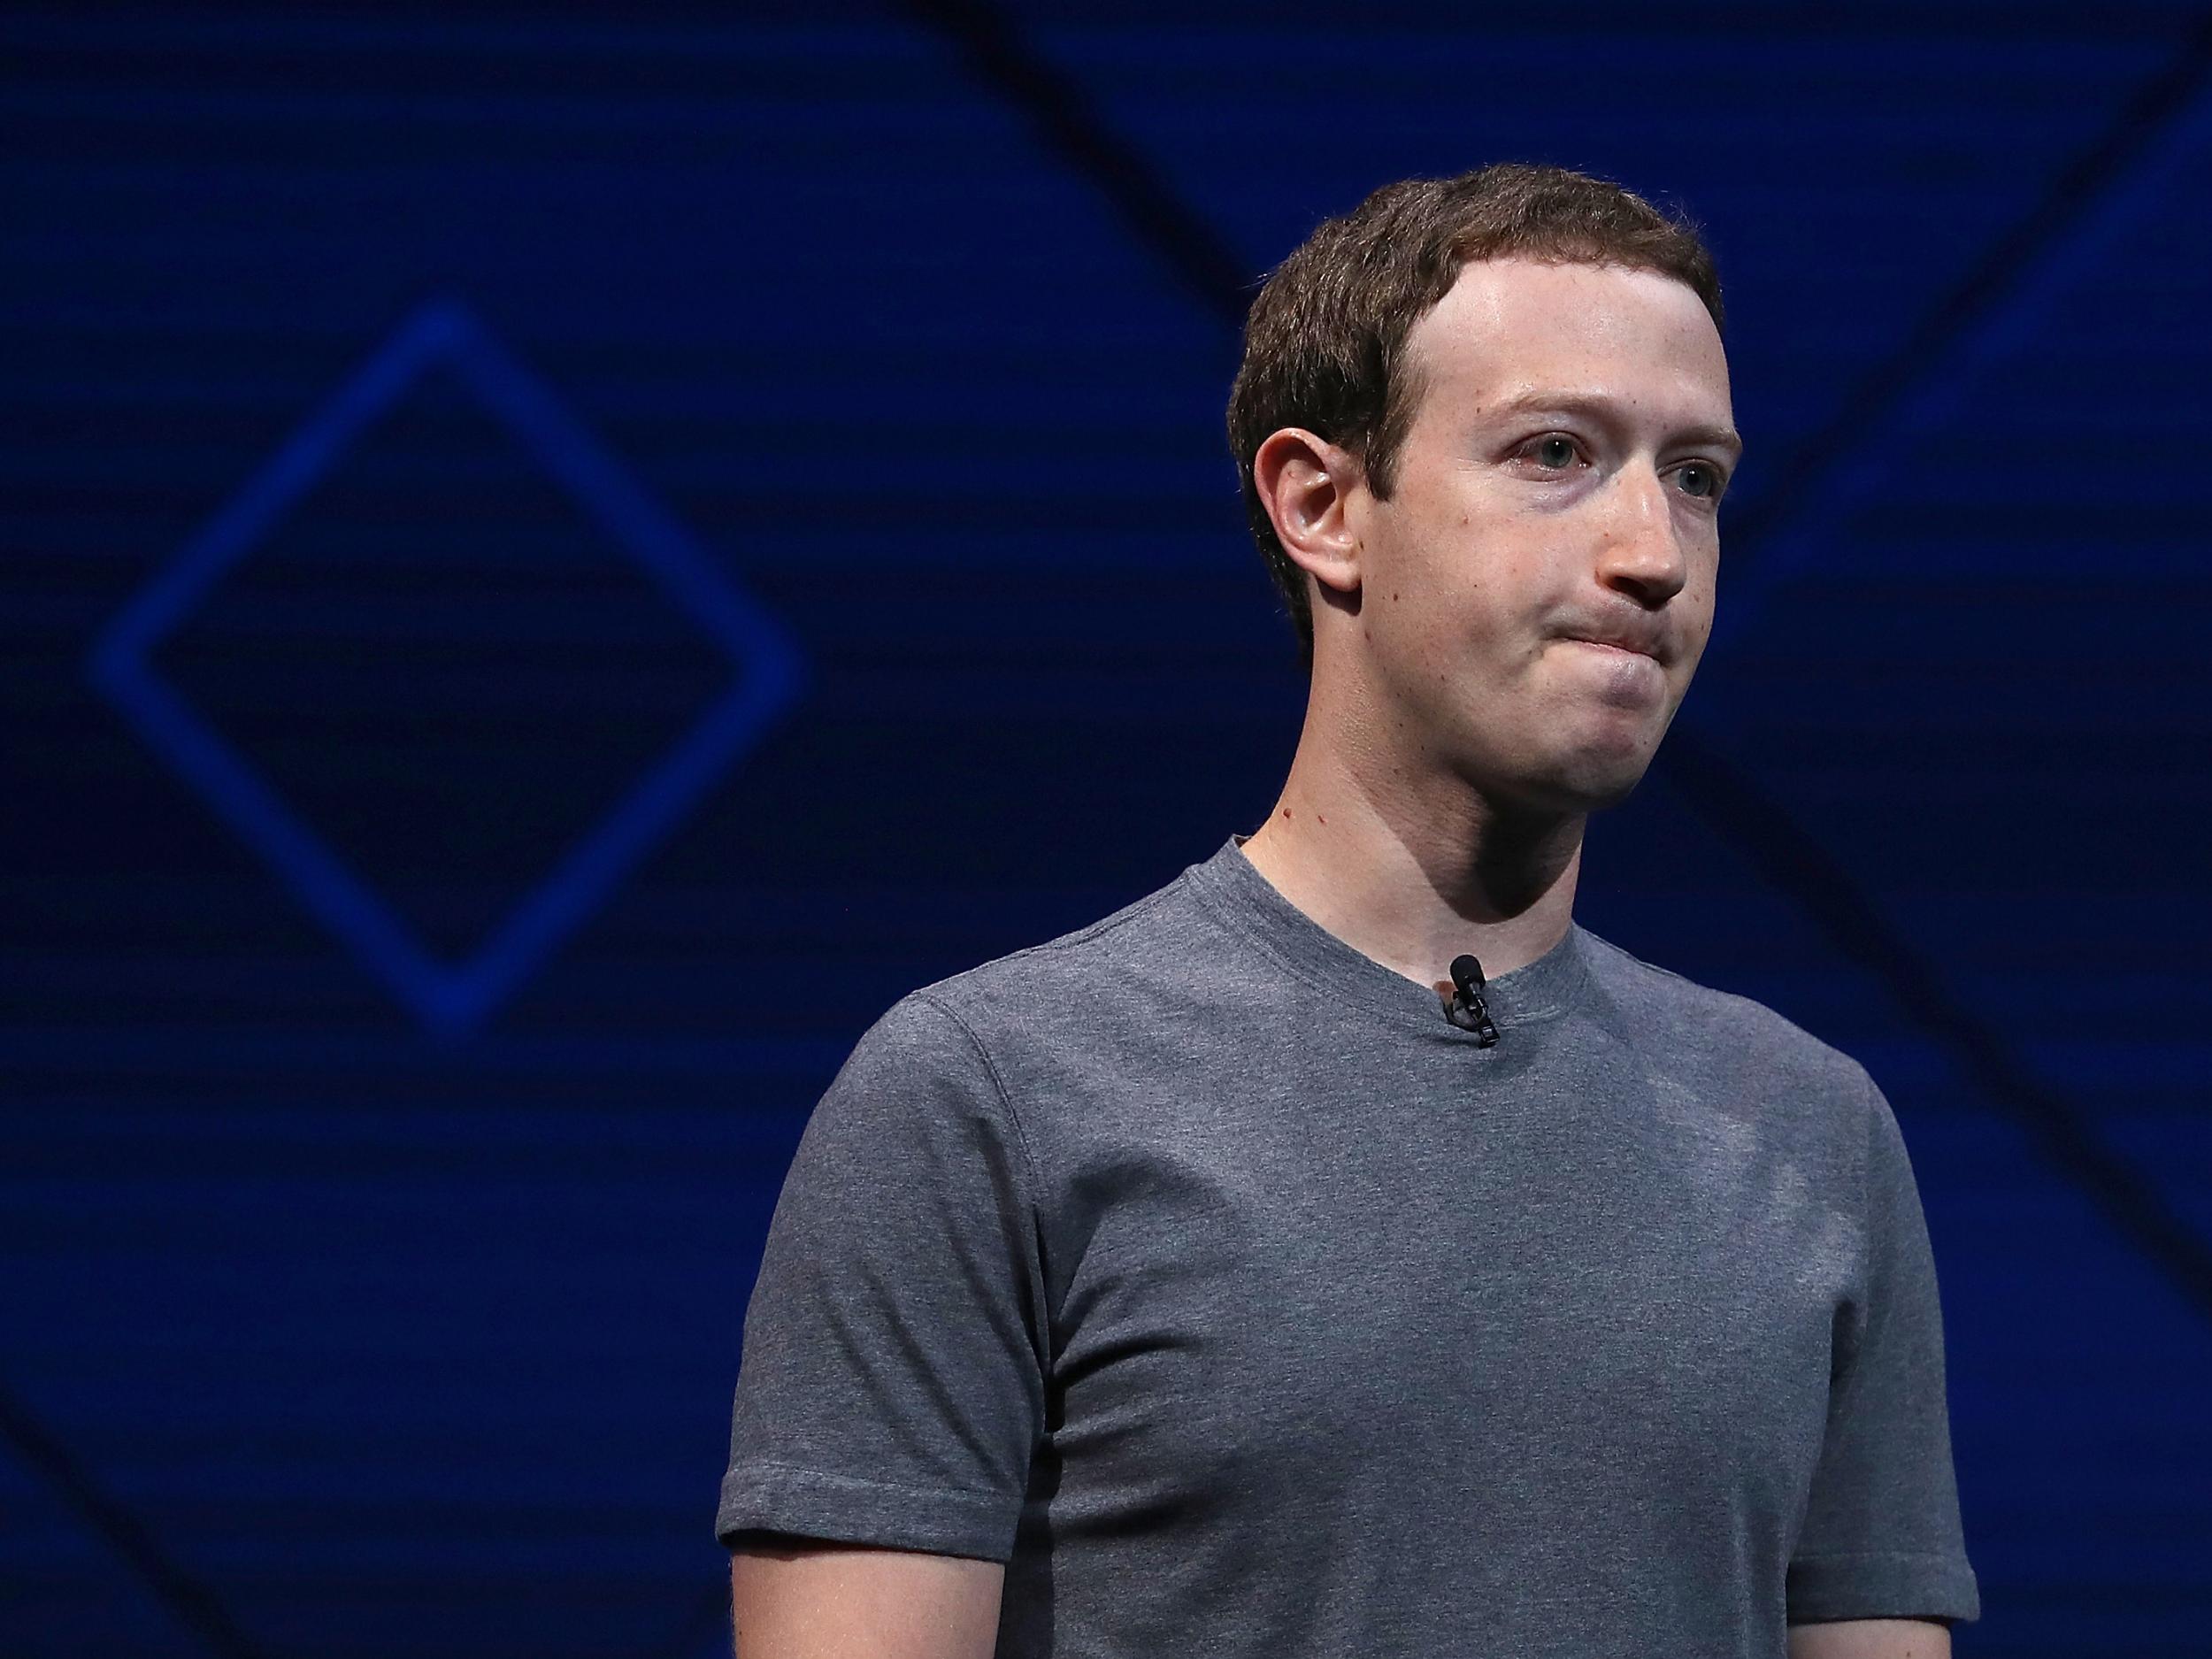 Mark Zuckerberg will testify to Capitol Hill lawmakers next week regarding his social media platform's usage and protection of user data